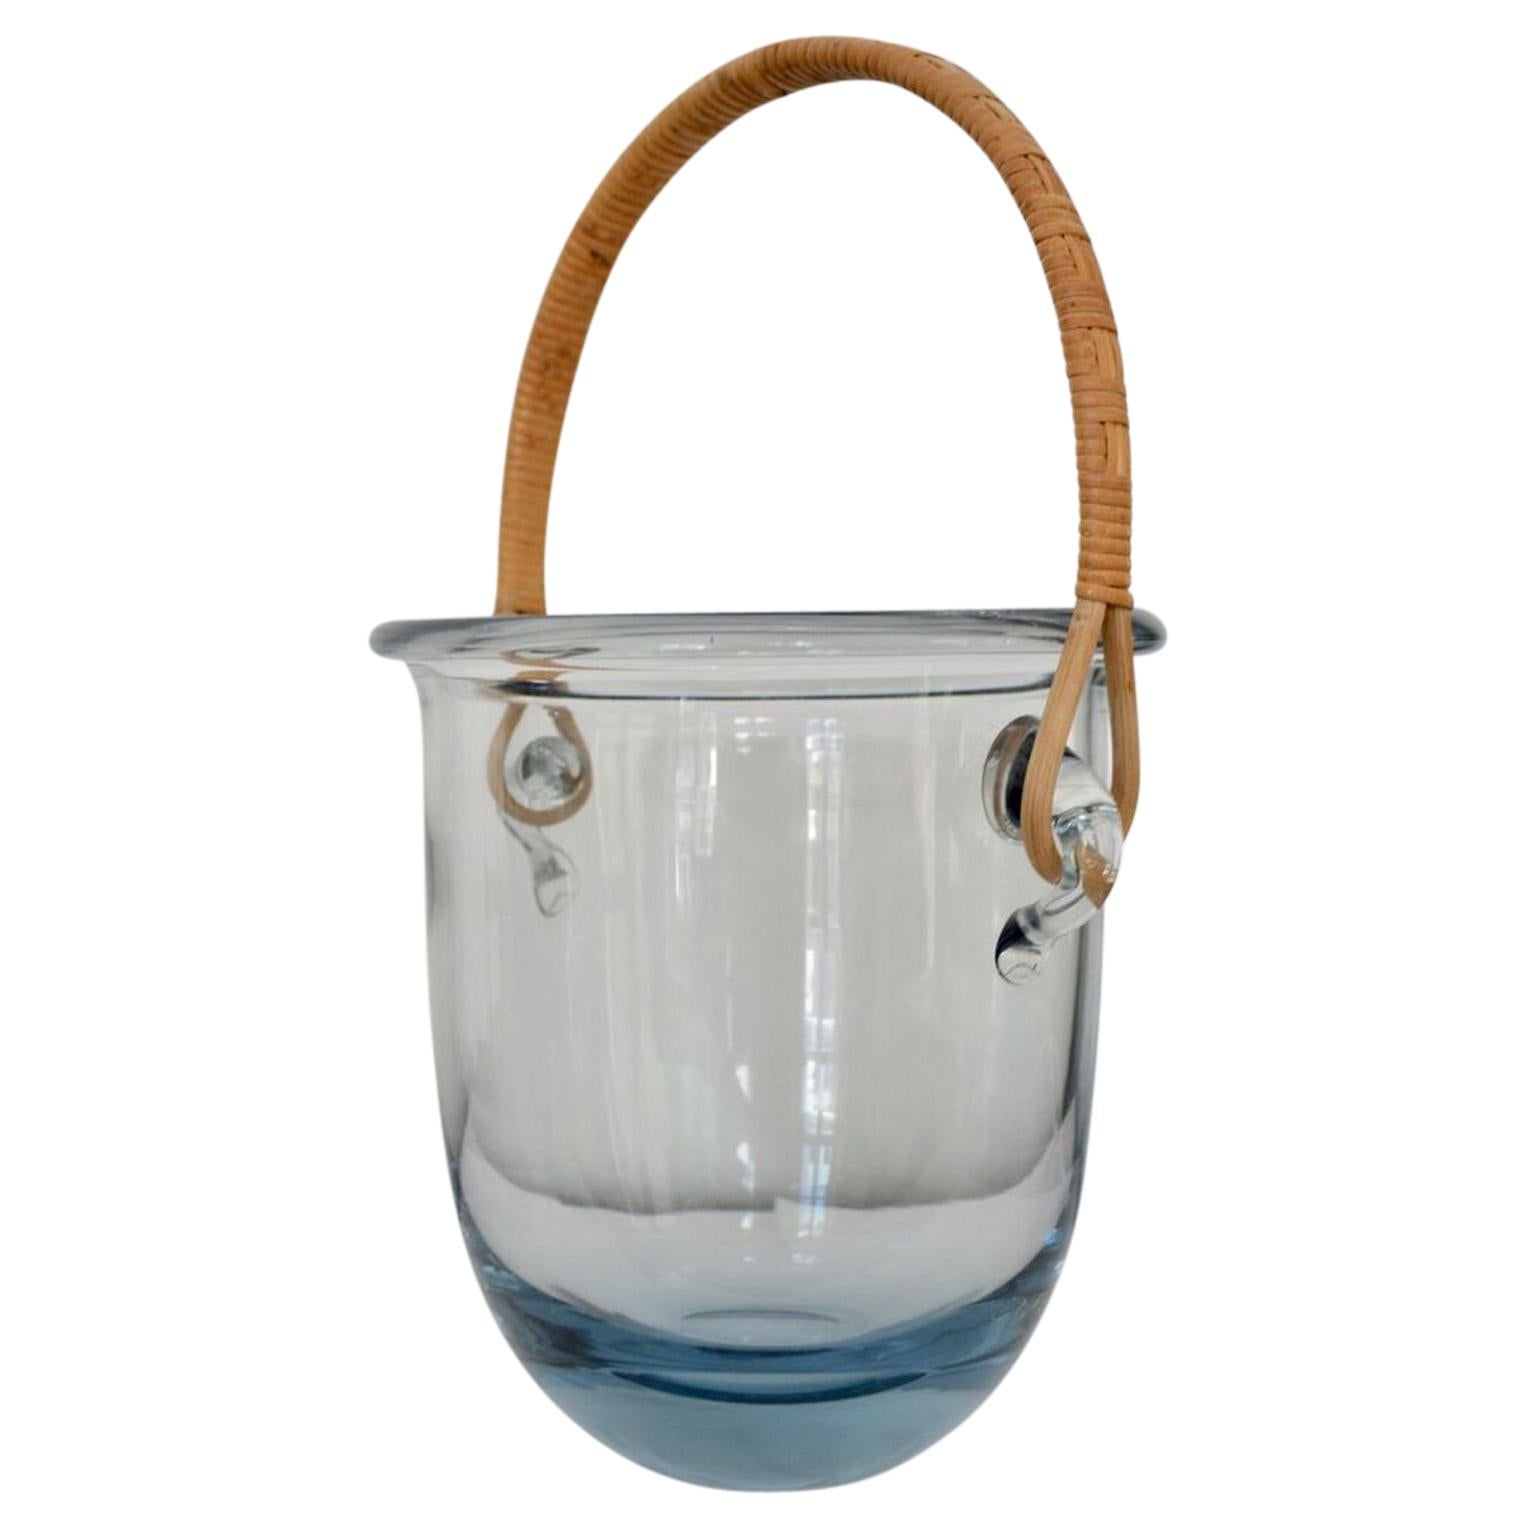 This large ice bucket is probably by Jacob E. Bang, and manufactured by Holmegaard in Denmark. It has a rattan handle and is signed, but not very easy to read.